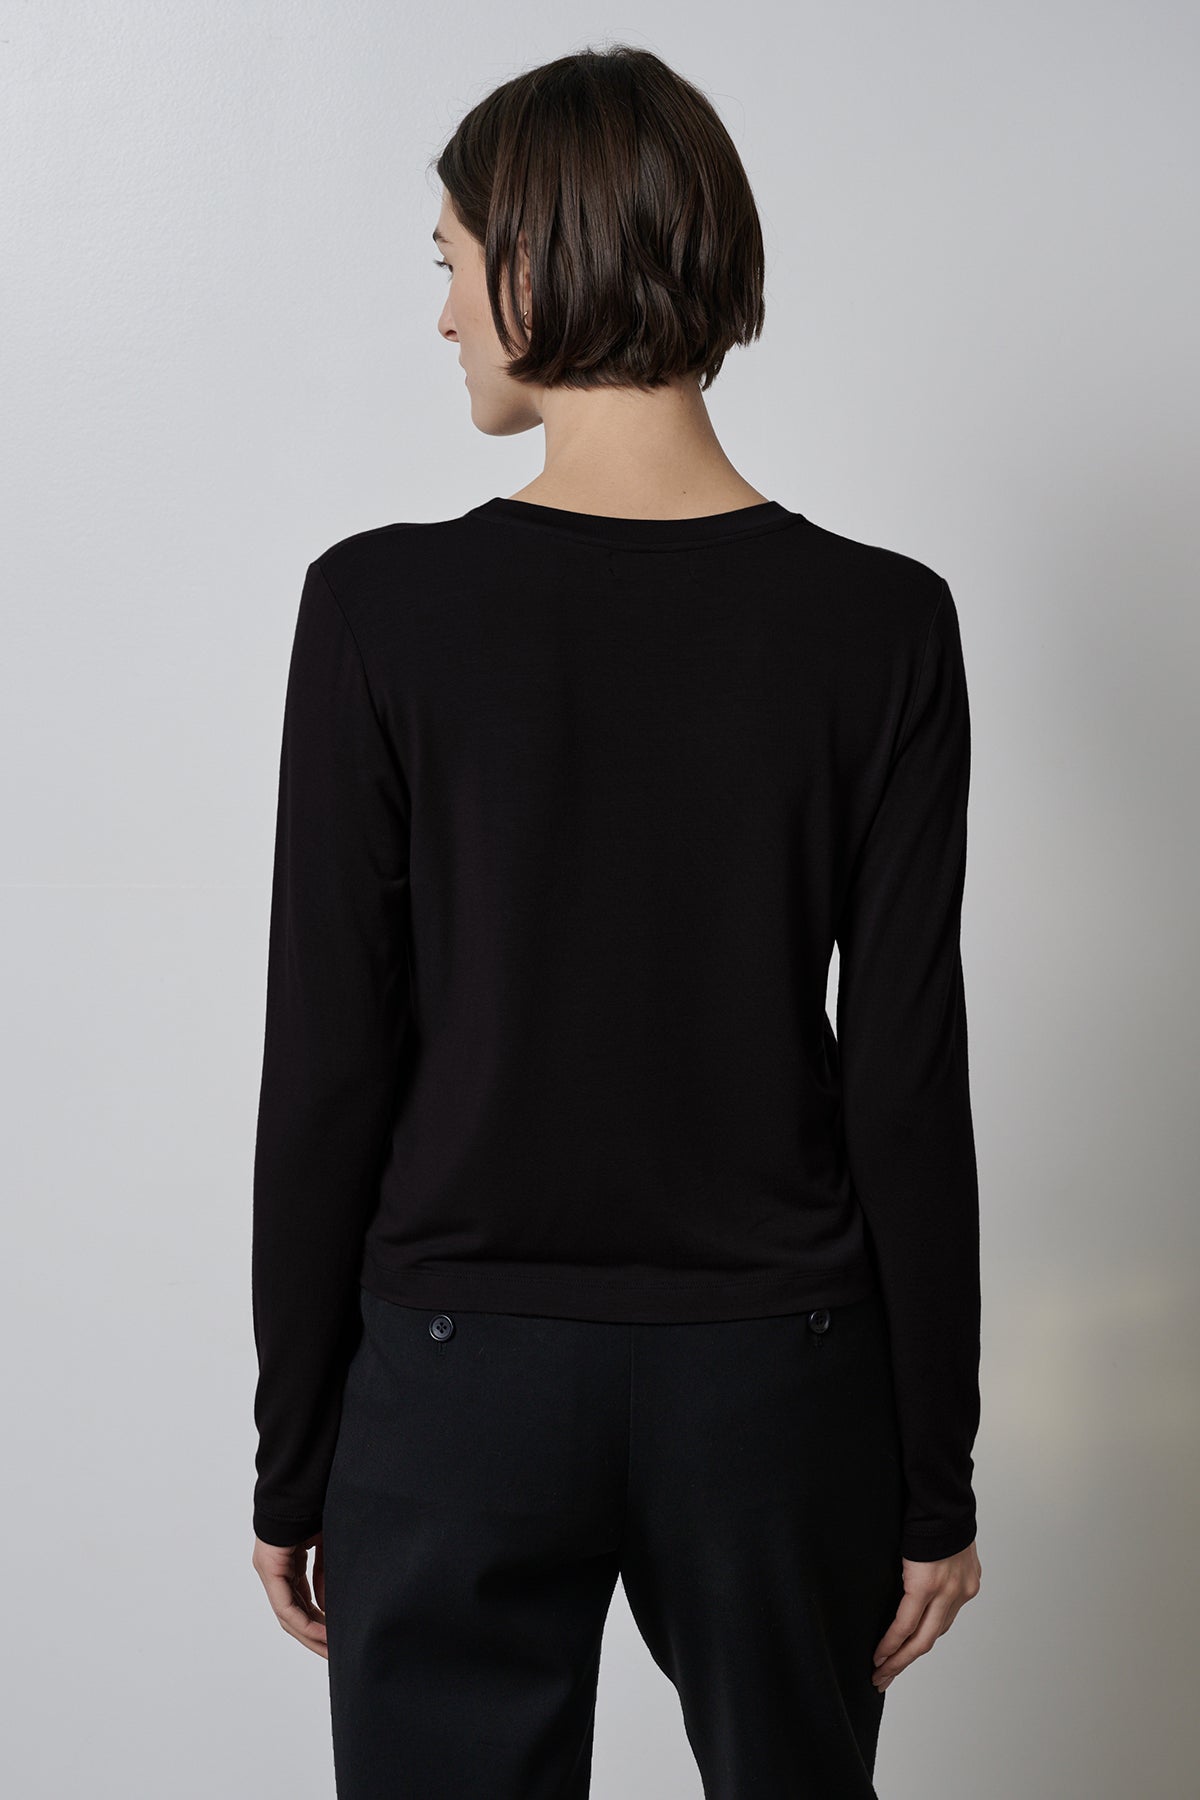   A woman wearing a black rib knit PACIFICA TEE by Velvet by Jenny Graham and slim-fitting black pants is seen from the back view. 